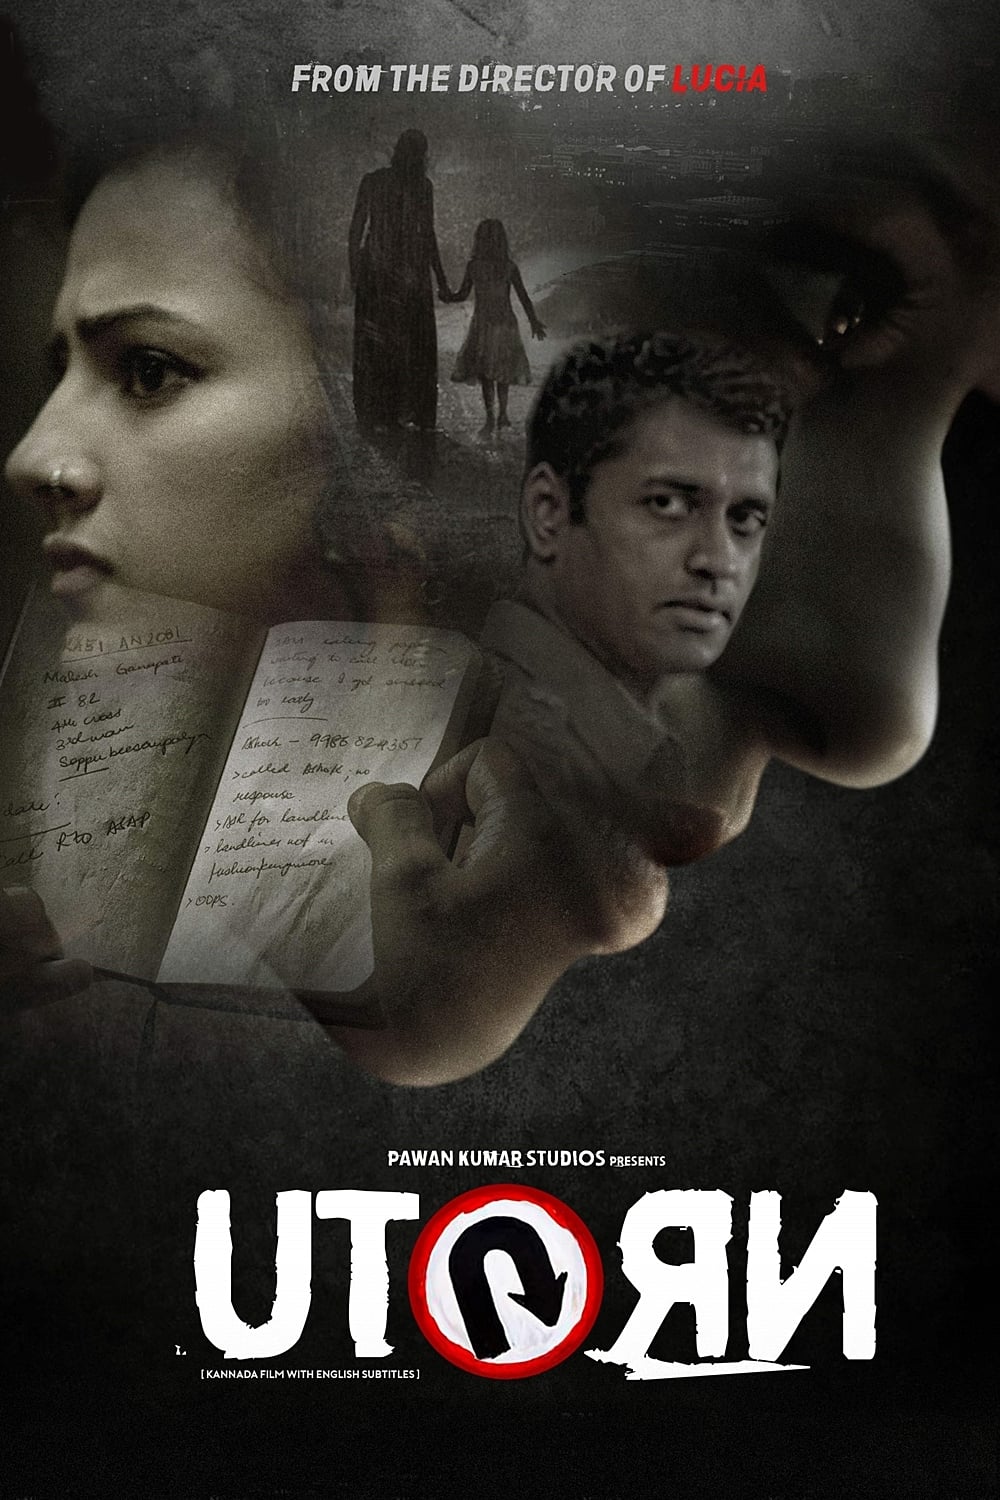 Poster for the movie "U Turn"